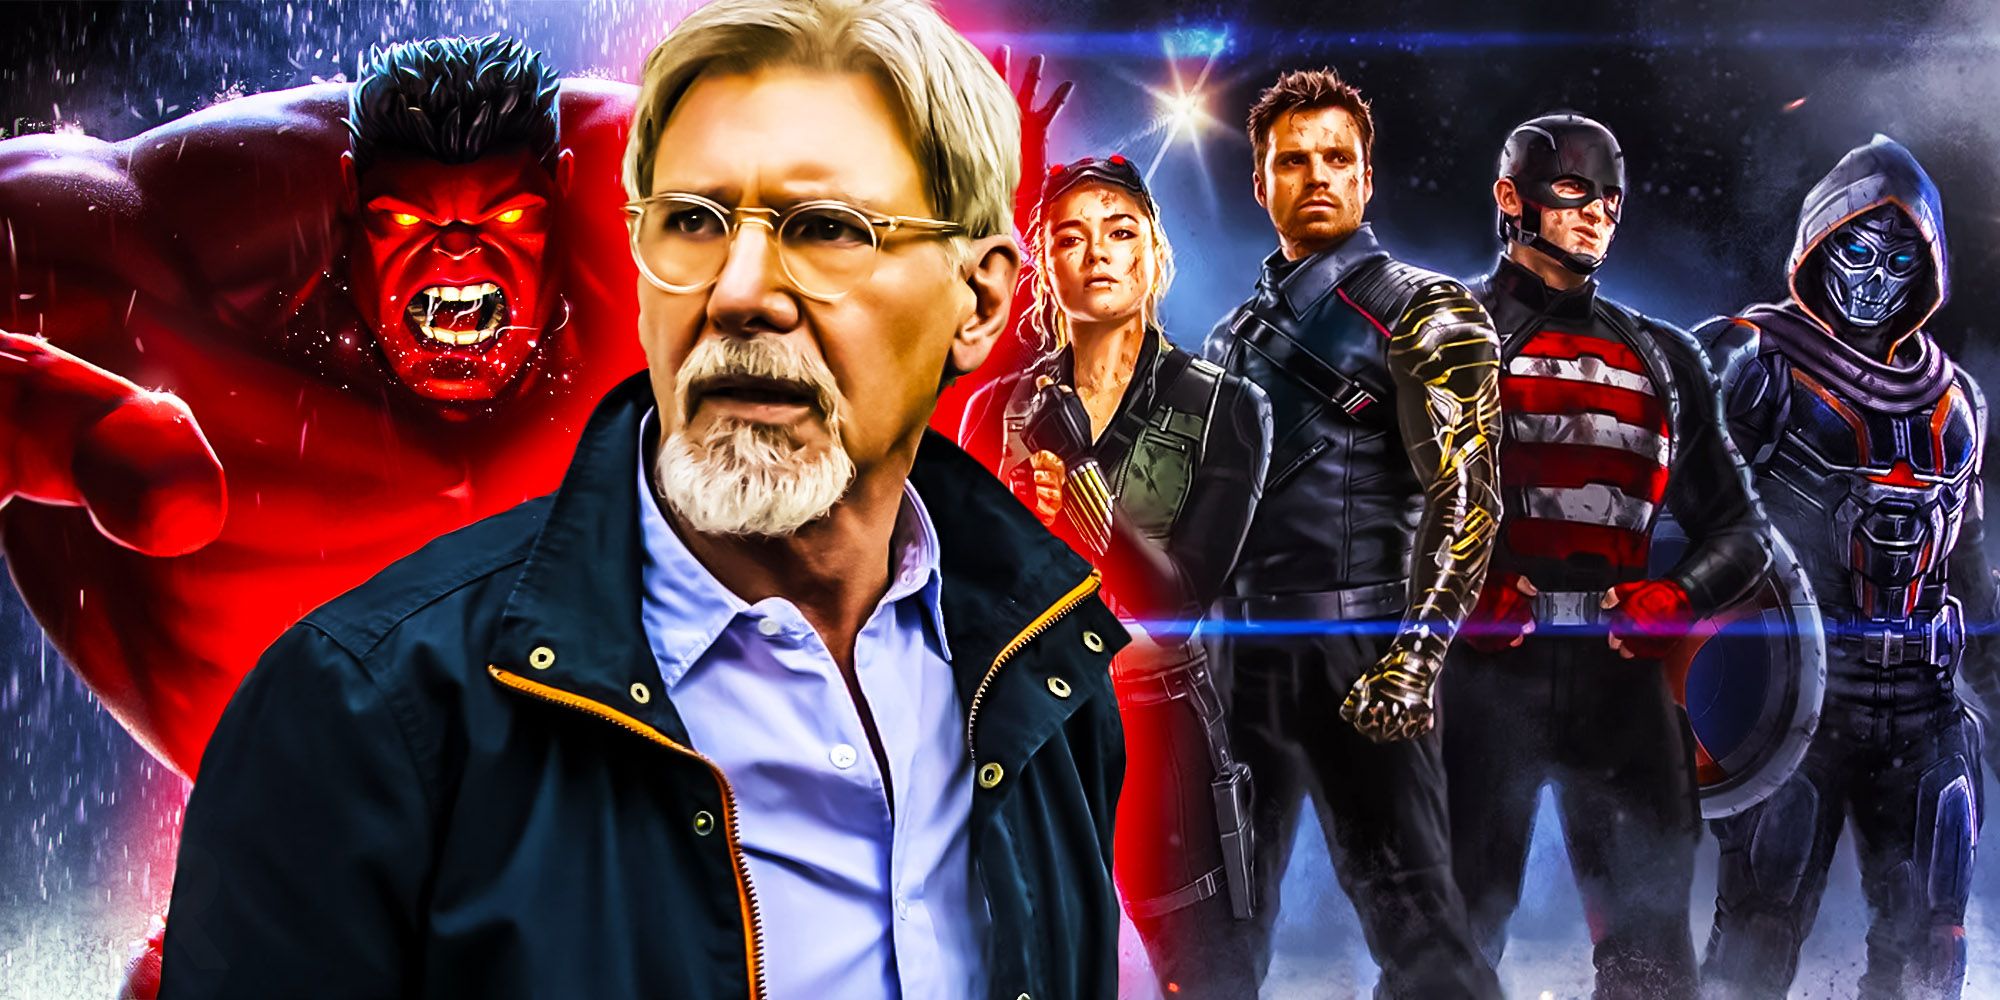 Blended image of Harrison Ford looking concerned, with an angry red Hulk and the Thunderbolt teams lined up and posing